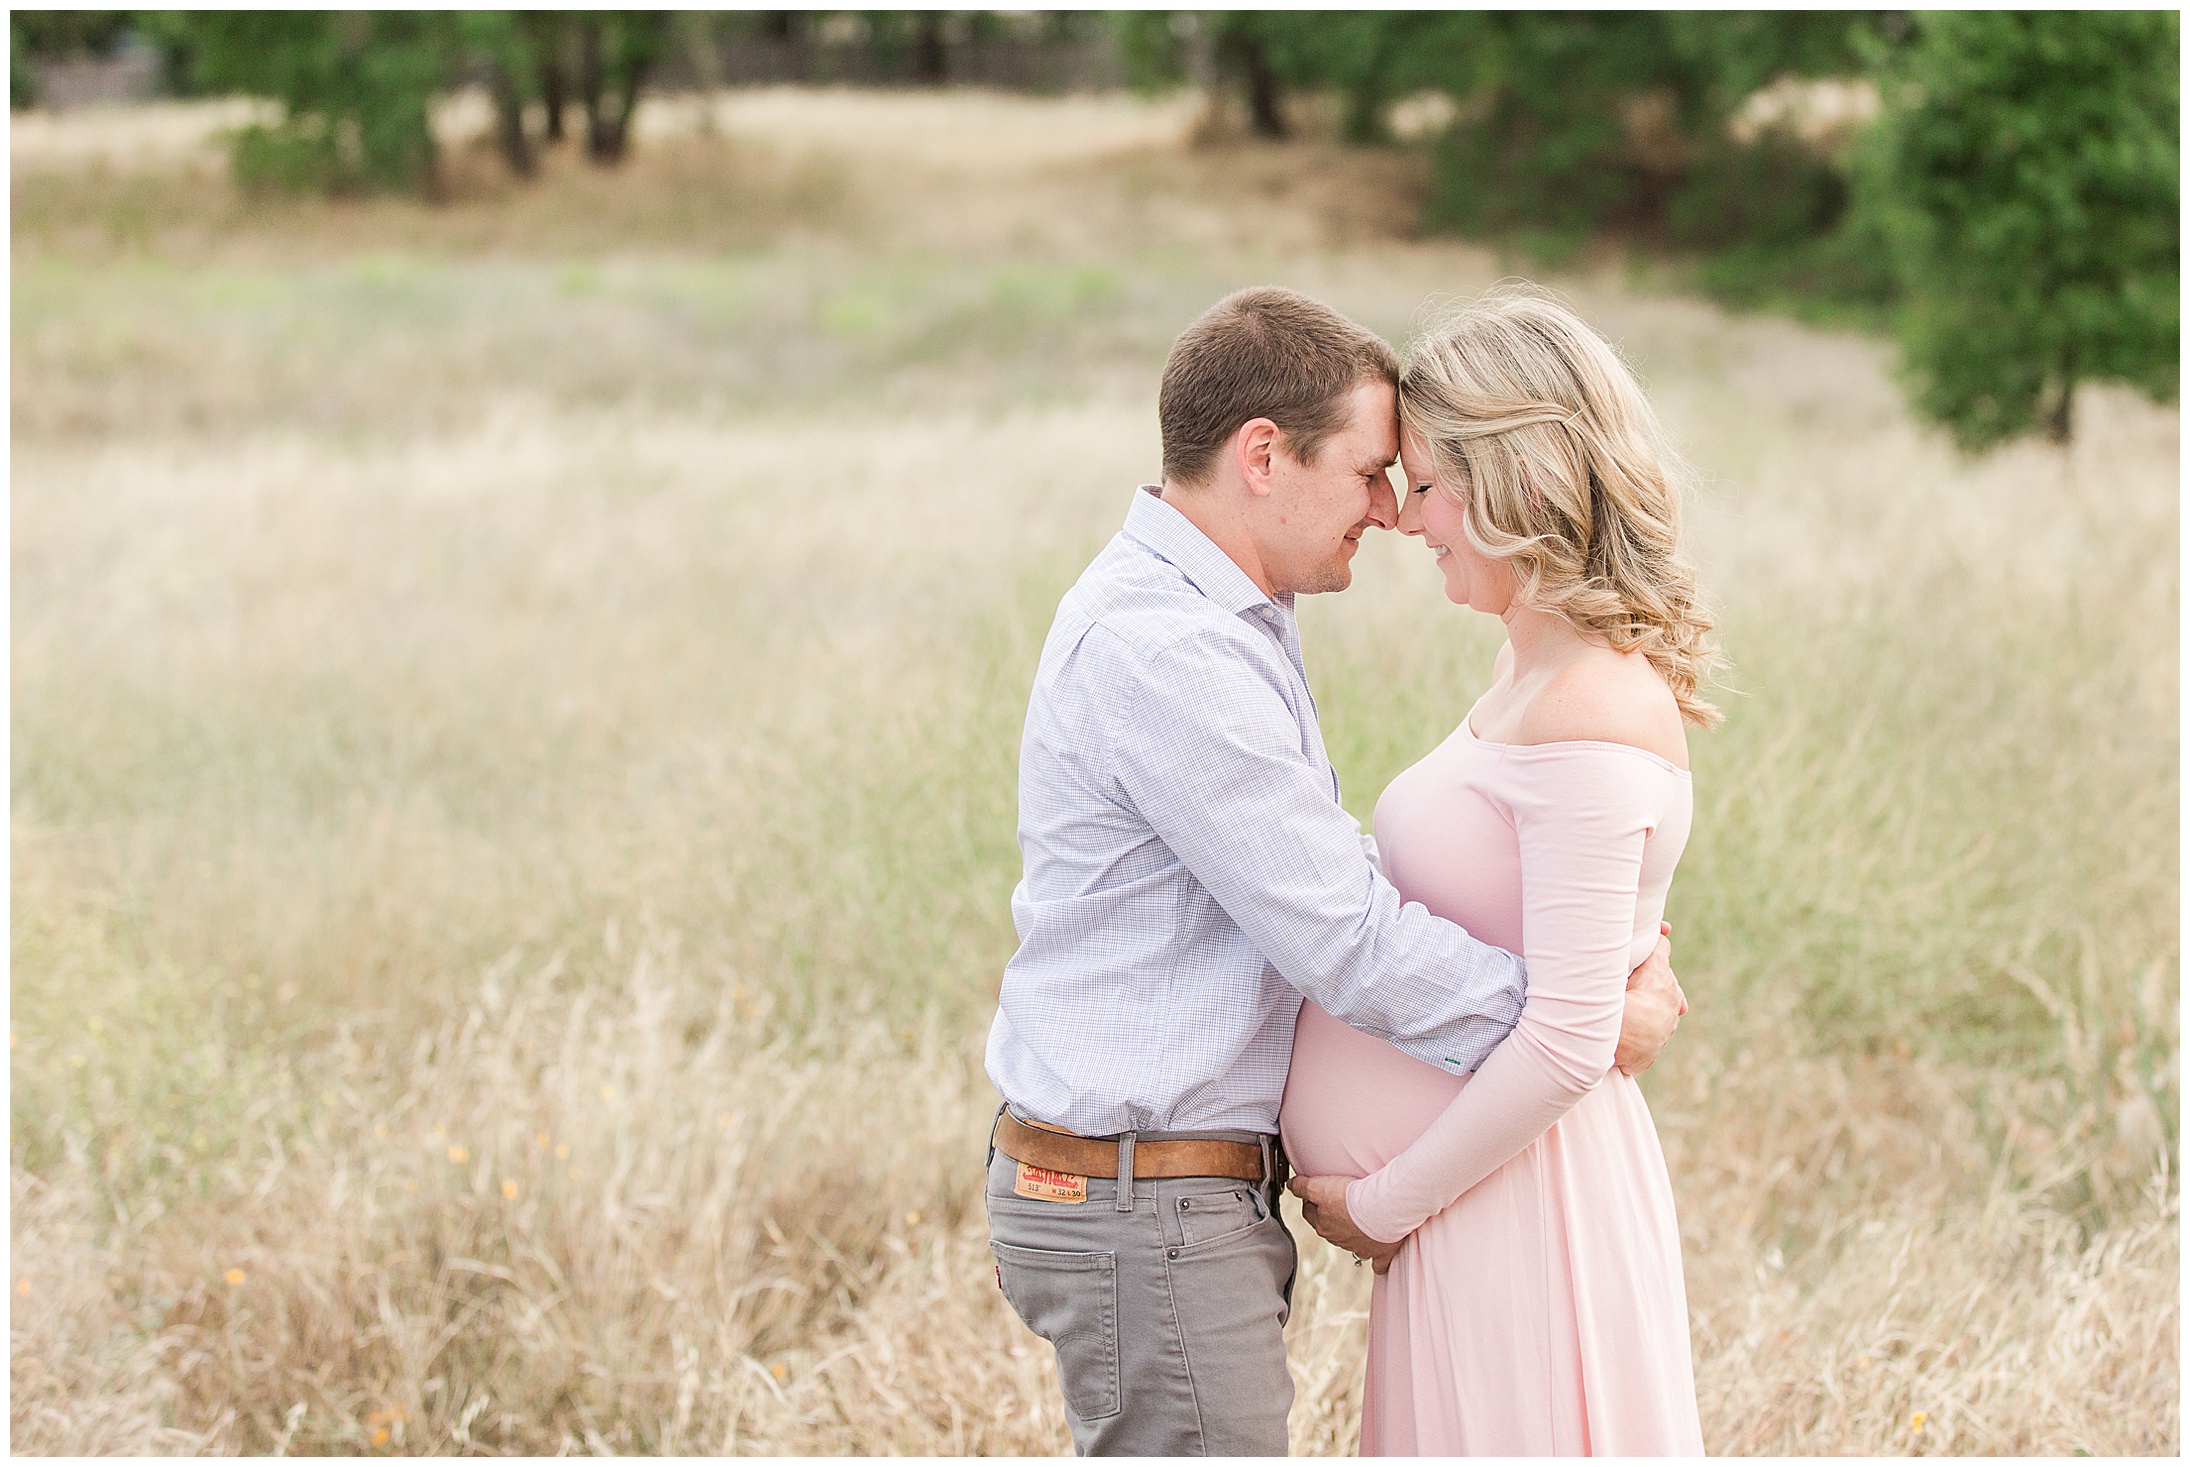 Grass Field Valley Oak Trees Maternity Session Chico California Pink Dress,